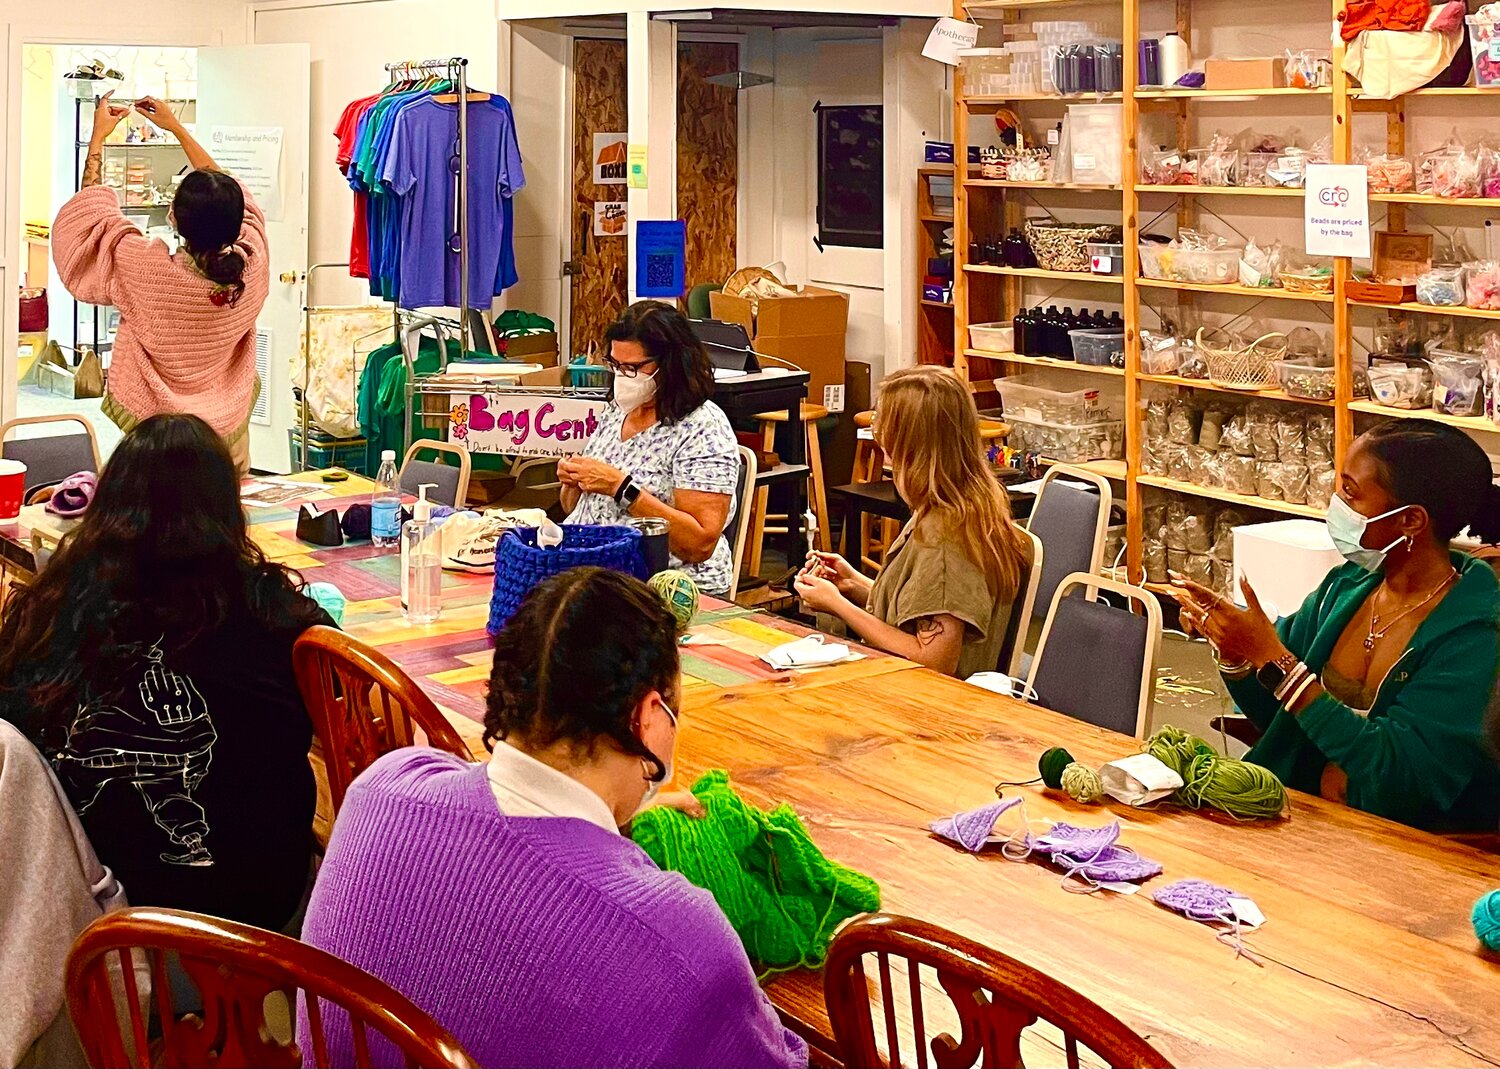 The Creative Reuse Center hosts crafting workshops to get makers inspired